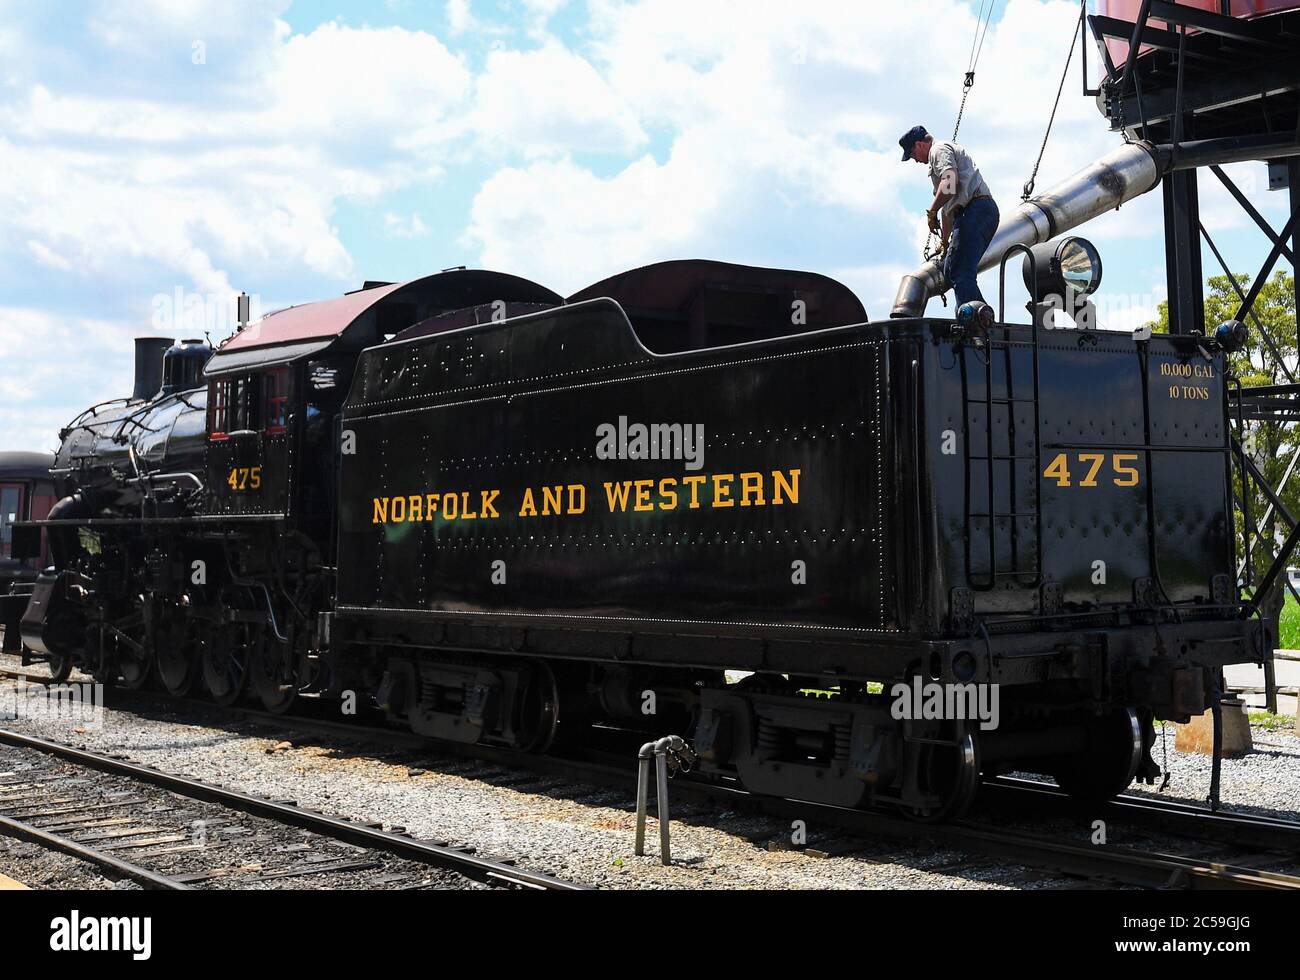 June 29, 2020: The Strasburg Railroad, Norfolk & Western, 475 steam locomotive fireman fills the water tank following the last excursion of the day on Monday, June, 29, 2020, in Ronks, Pennsylvania. The Strasburg Railroad re-opened for passenger service on Friday, June, 26th, after being closed due to the COVID-19 pandemic. Additional health related safety measures have been put in place for the re-opening. Rich Barnes/CSM Stock Photo